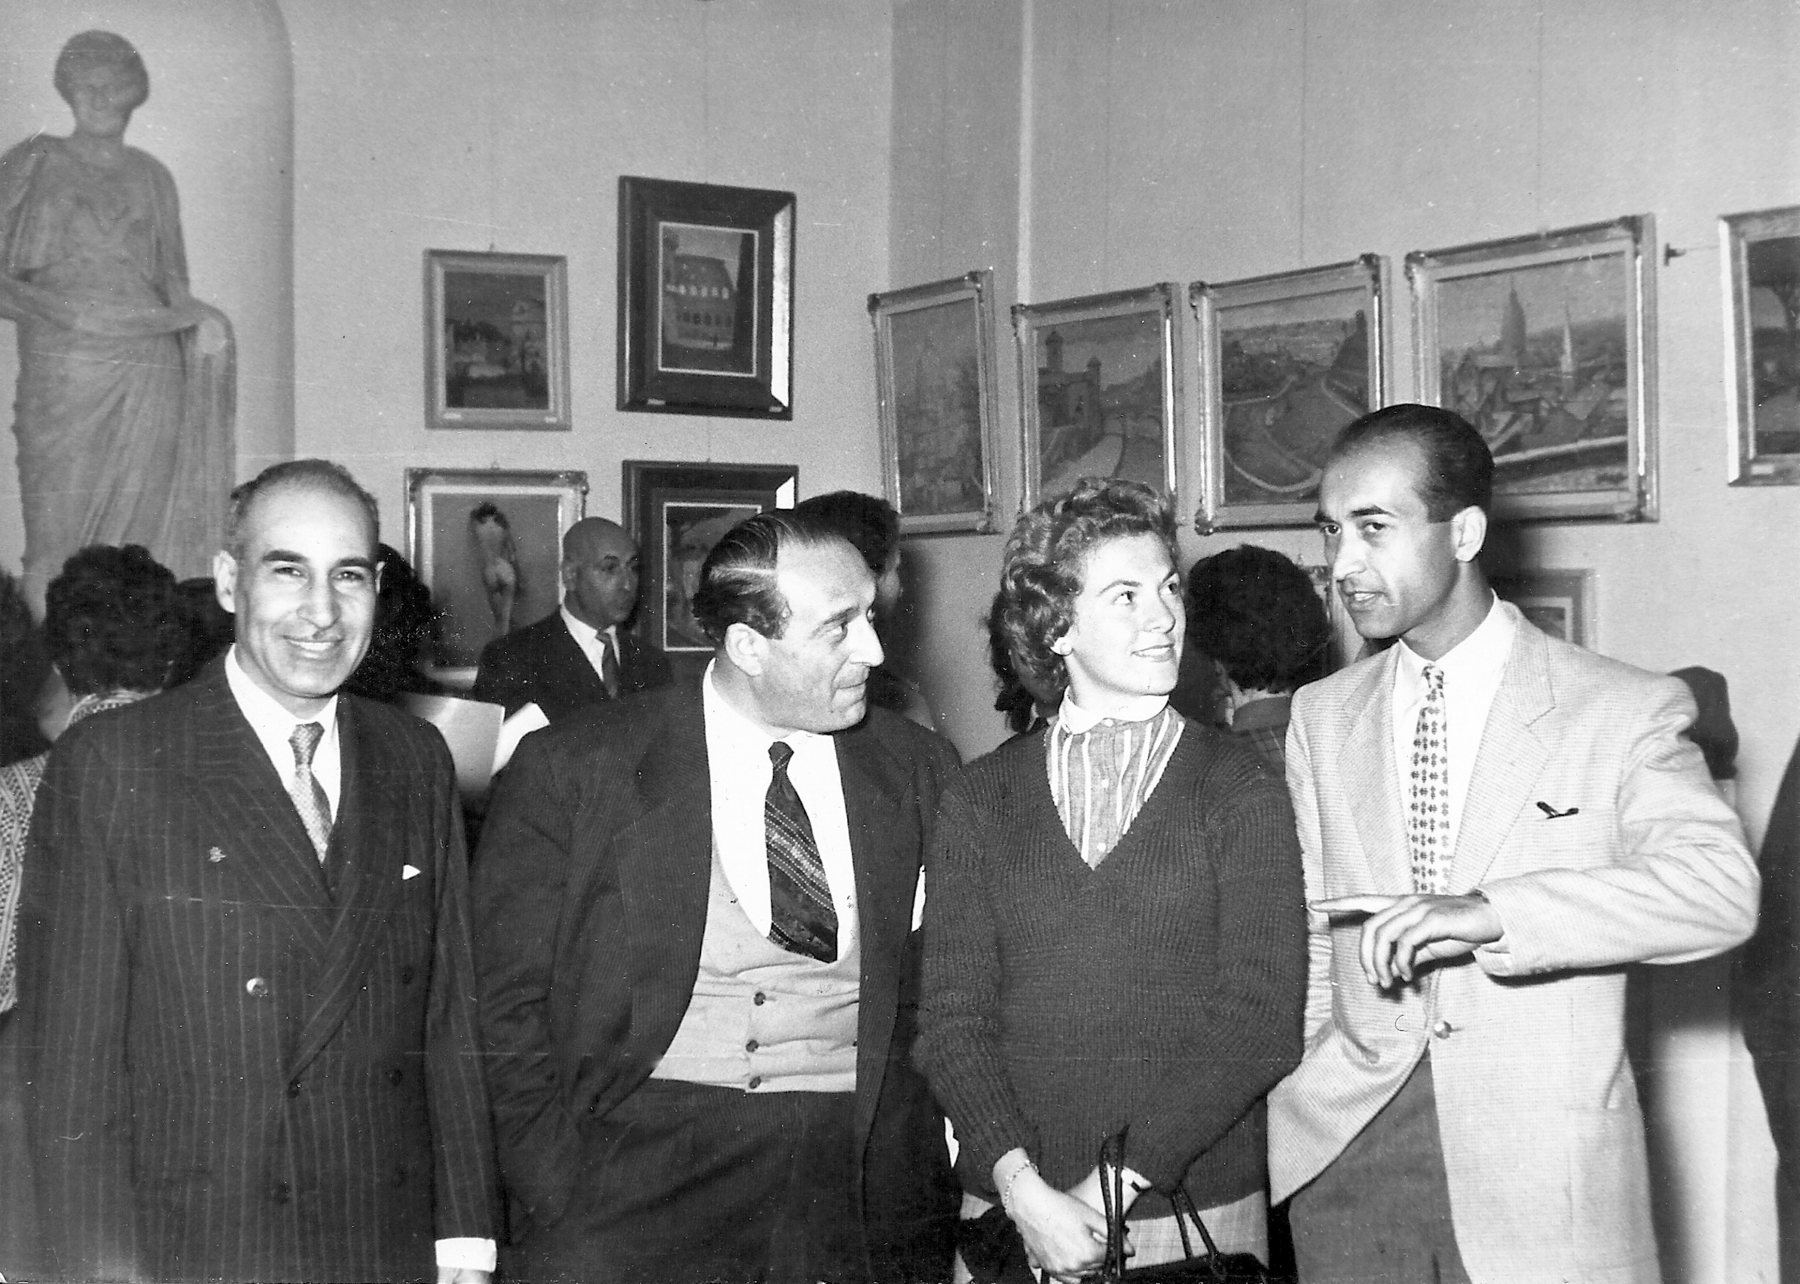 Exhibition of Arab artists in Rome, 10 April 1954. Mahmoud Hammad with guests.